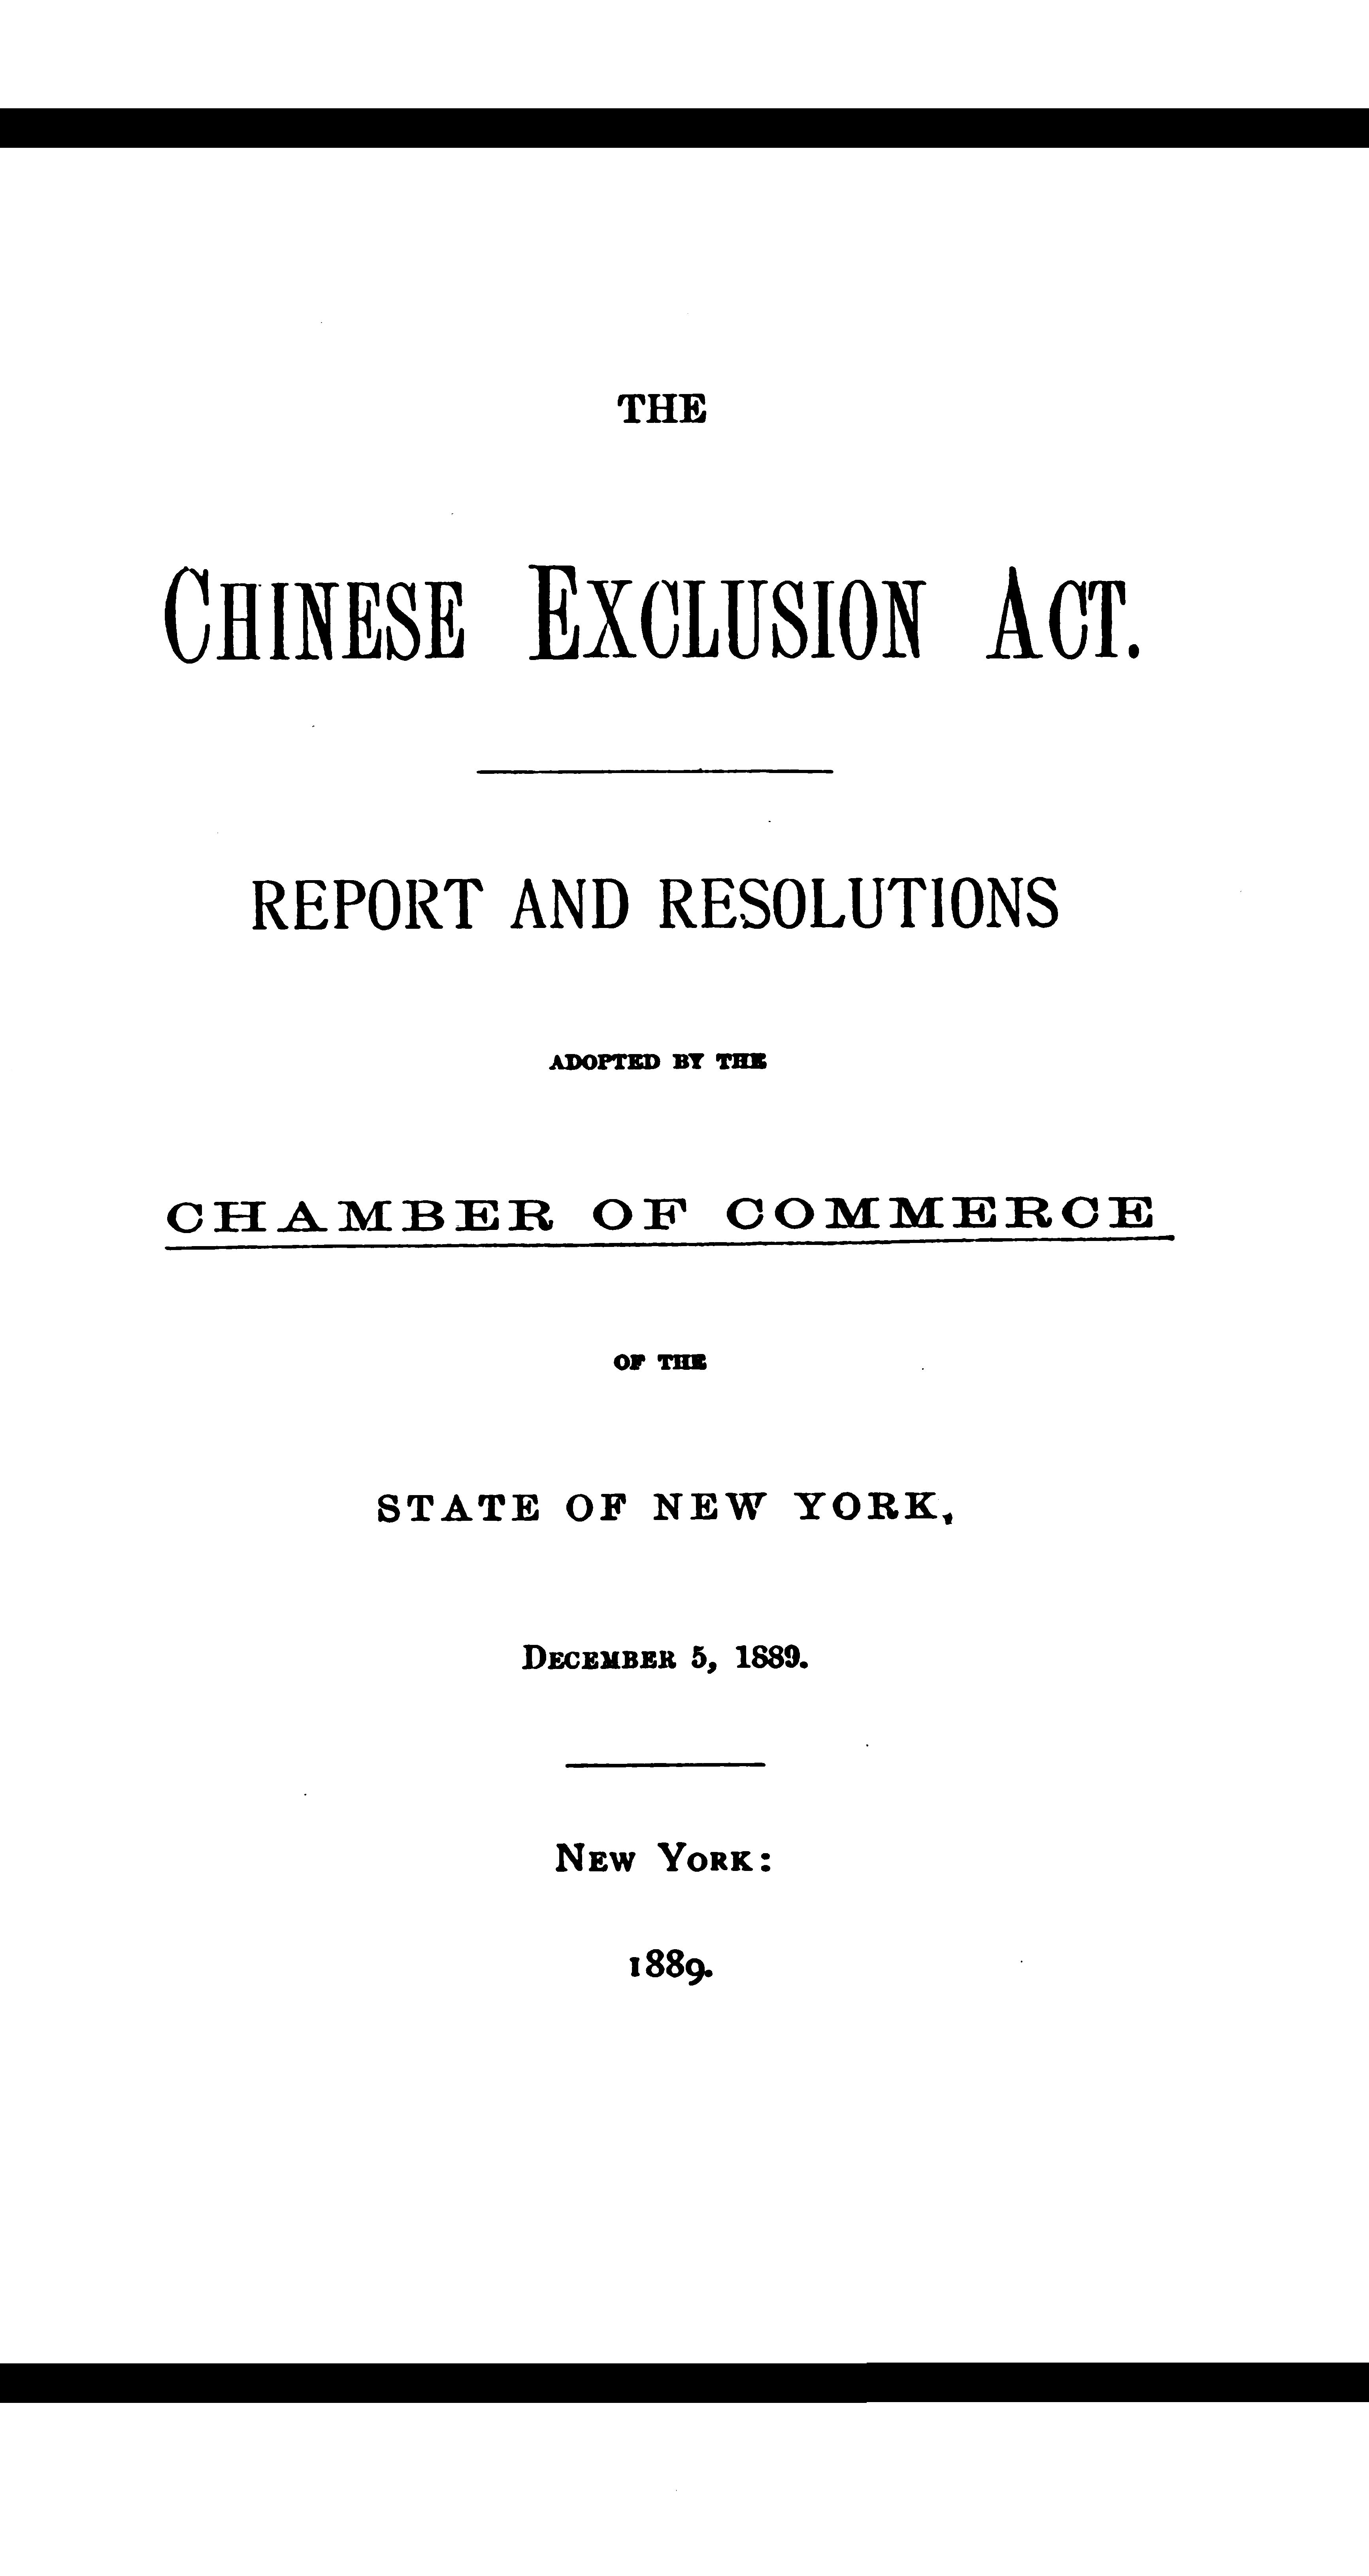 The Chinese Exclusion Act&#10;Report and Resolutions Adopted by the Chamber of Commerce of the State of New York